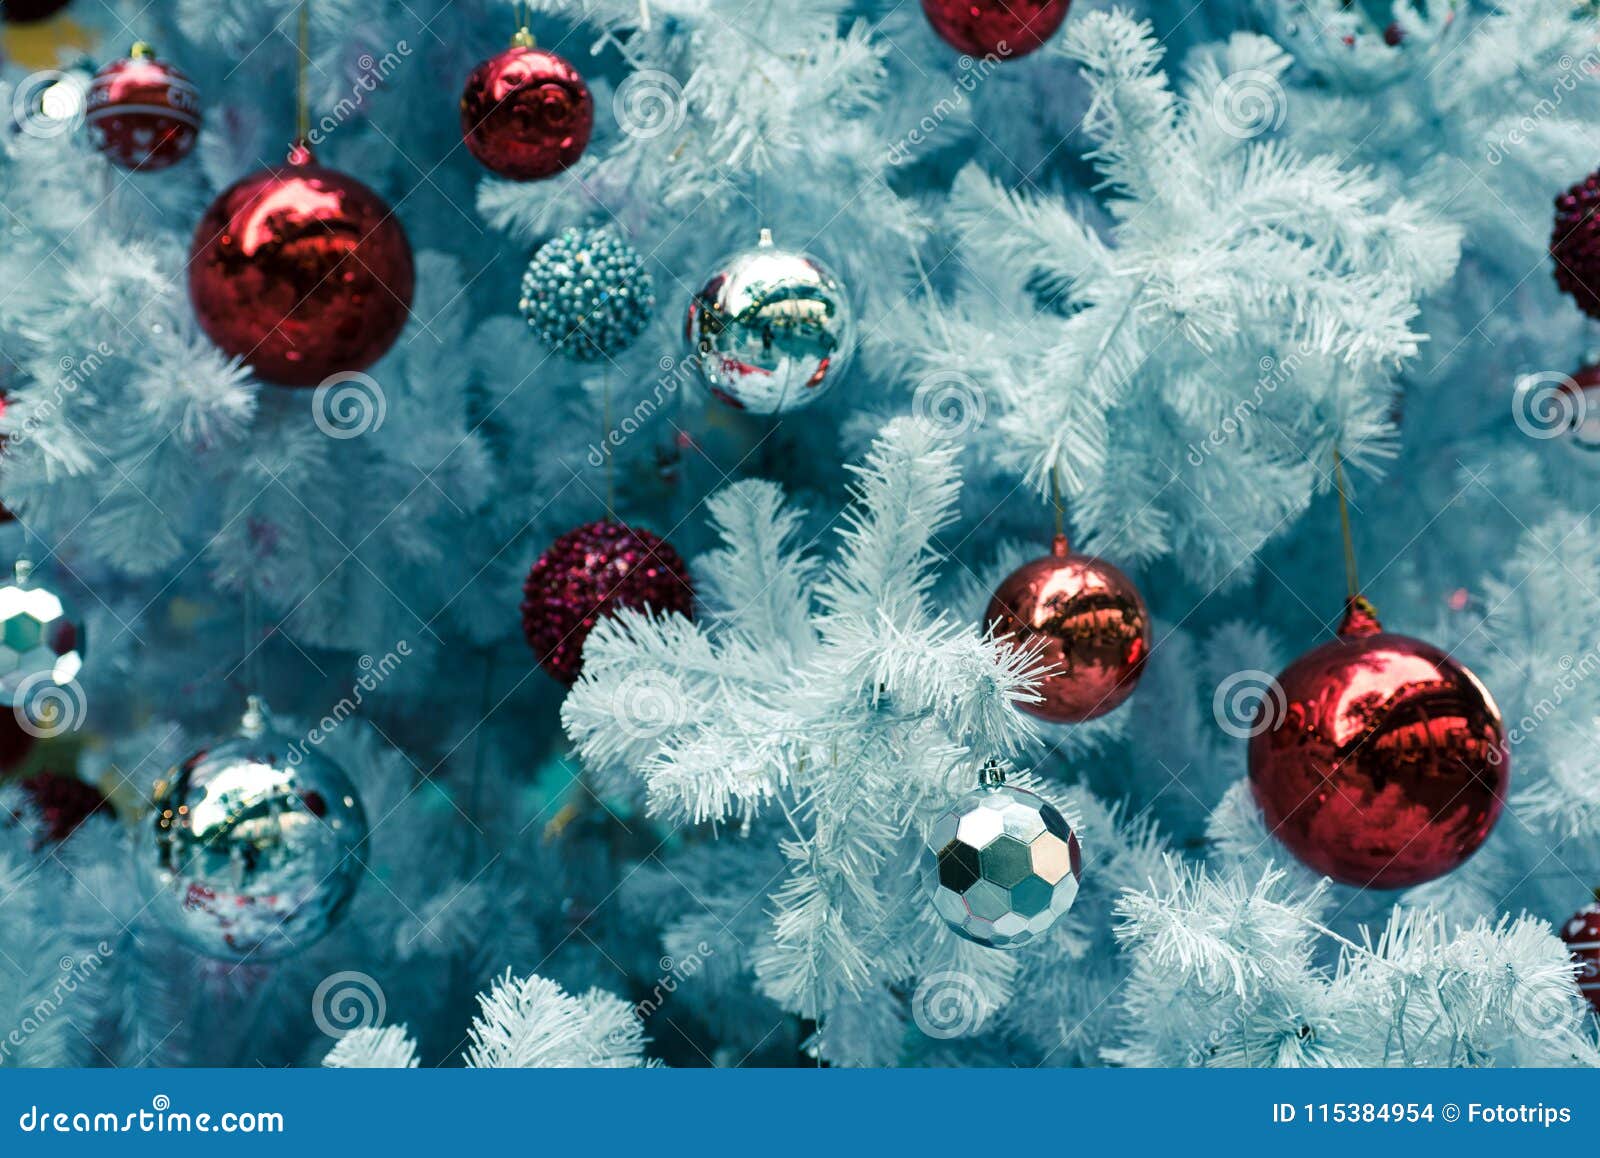 Closeup Of Christmas Ball From Christmas Tree. Holiday Background In ...